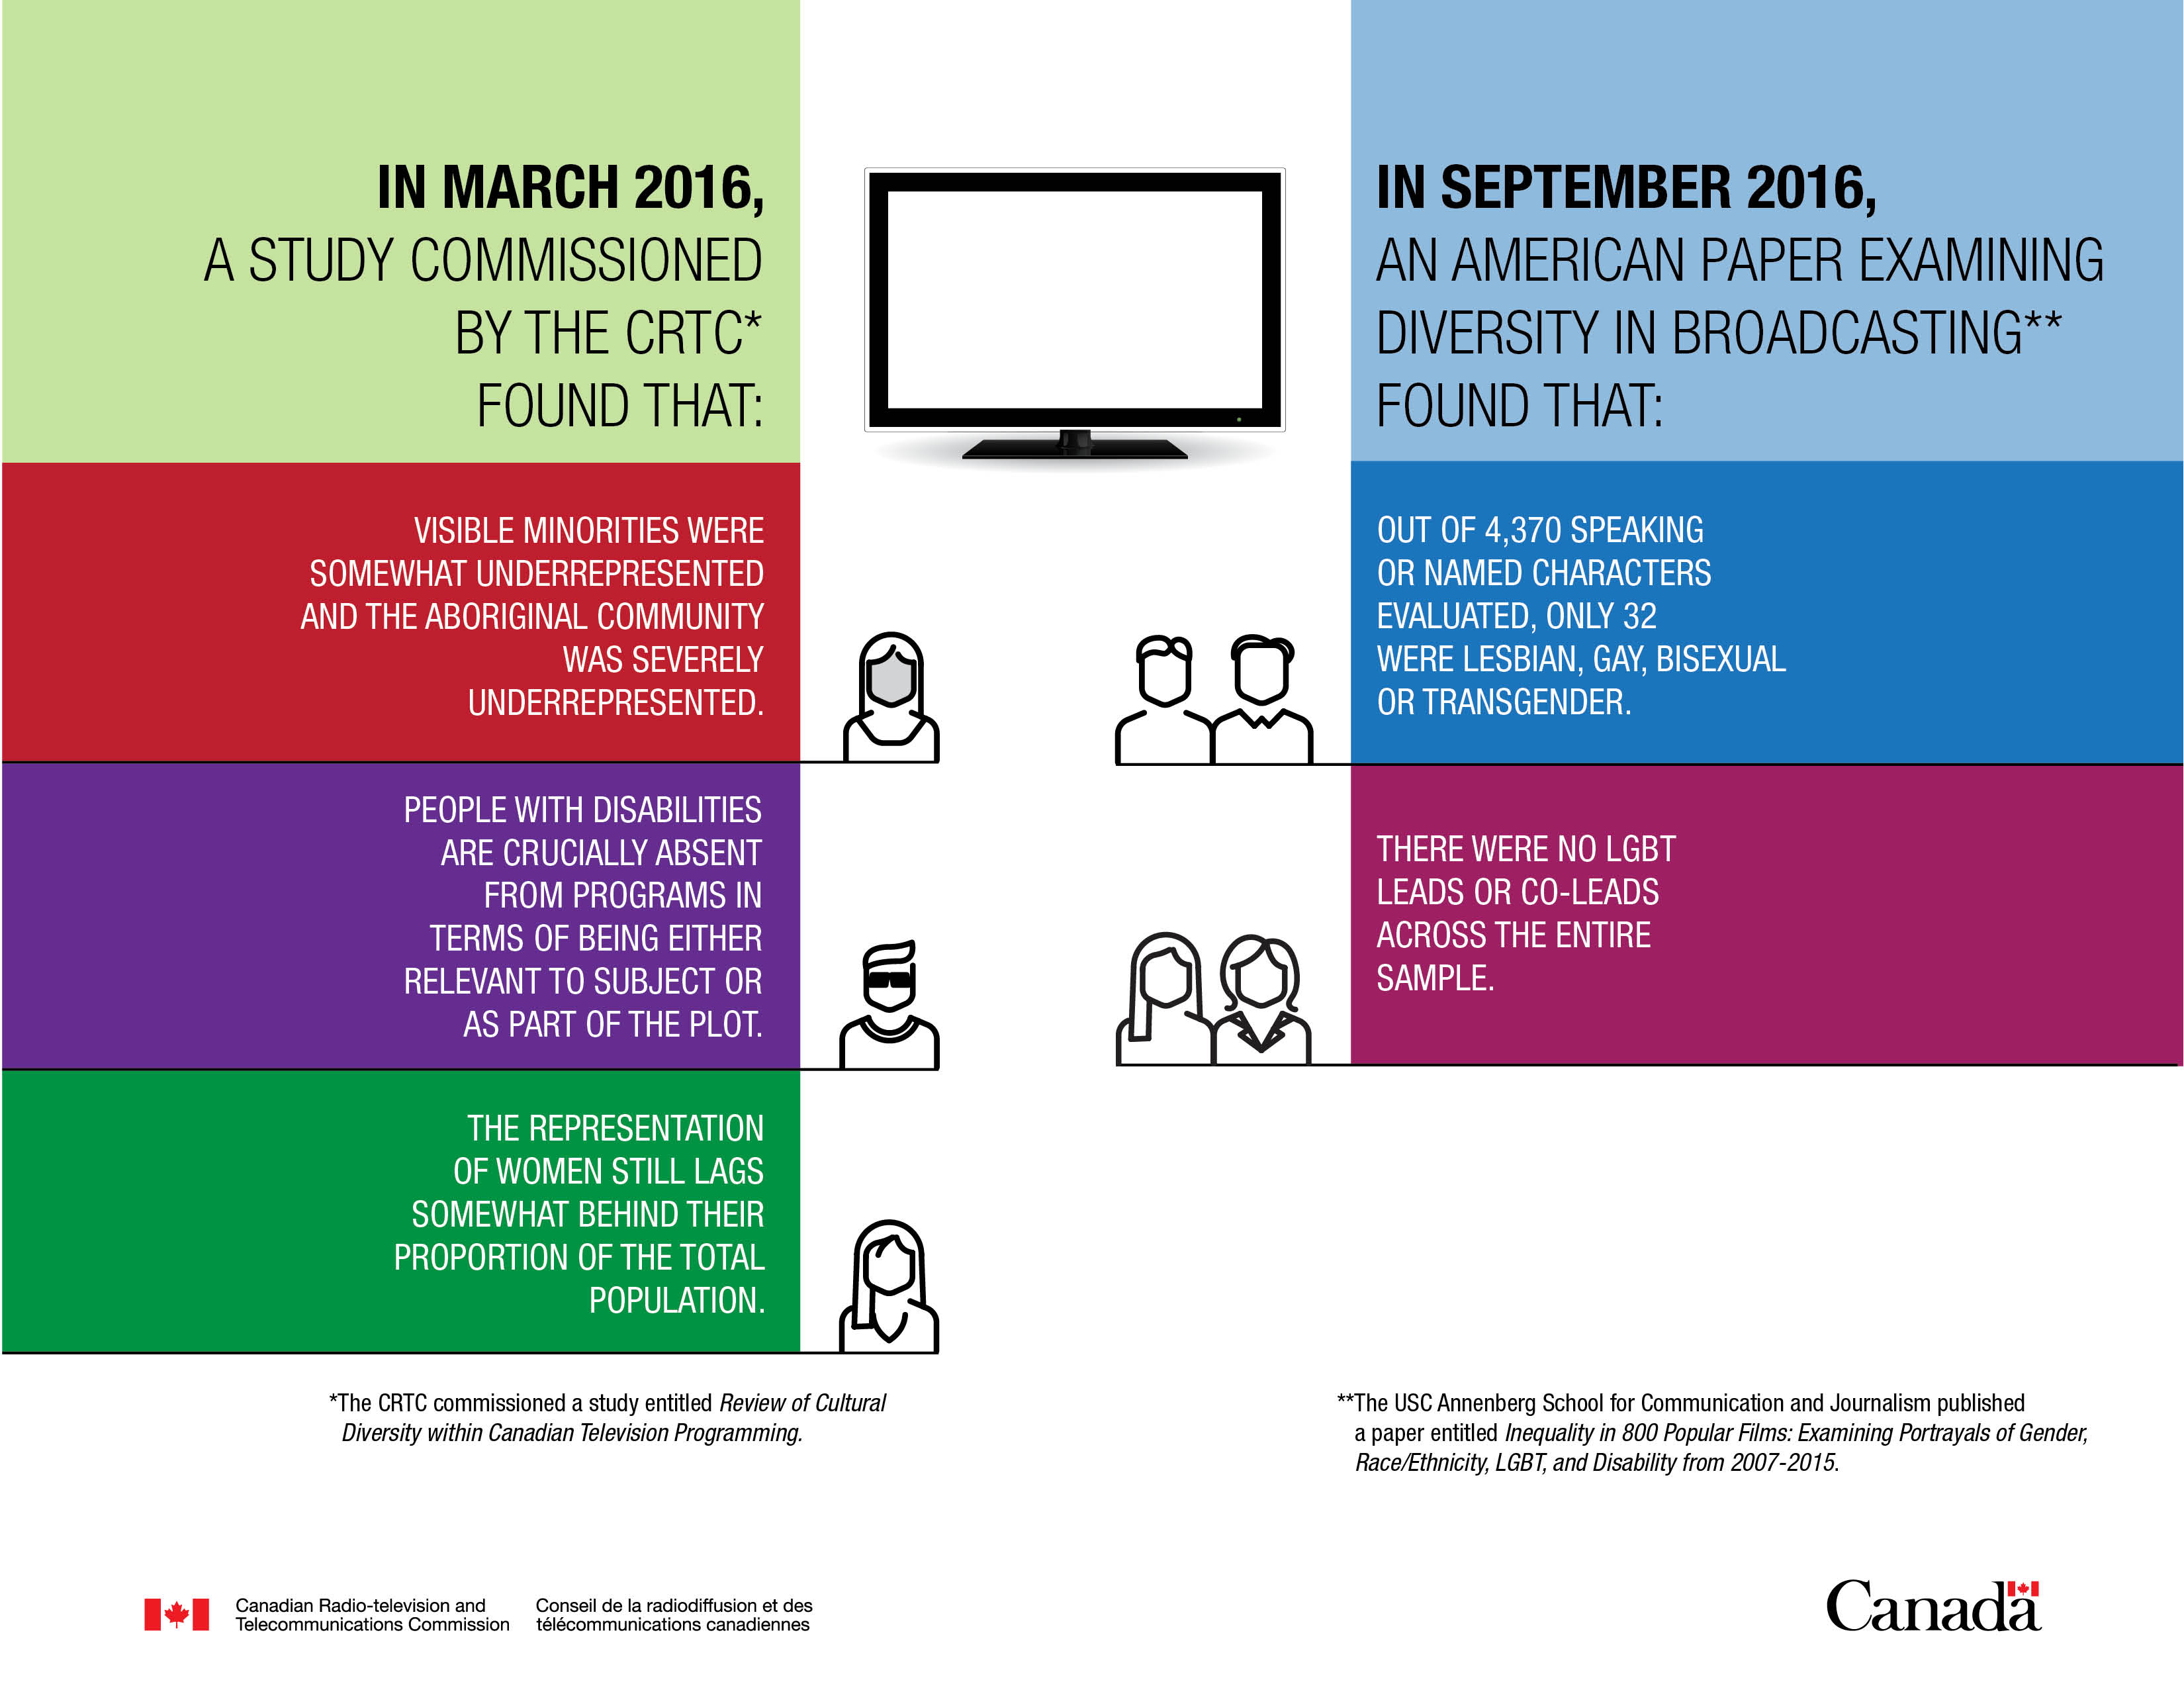 A one-page document that presents information on cultural diversity in Canadian and US media.